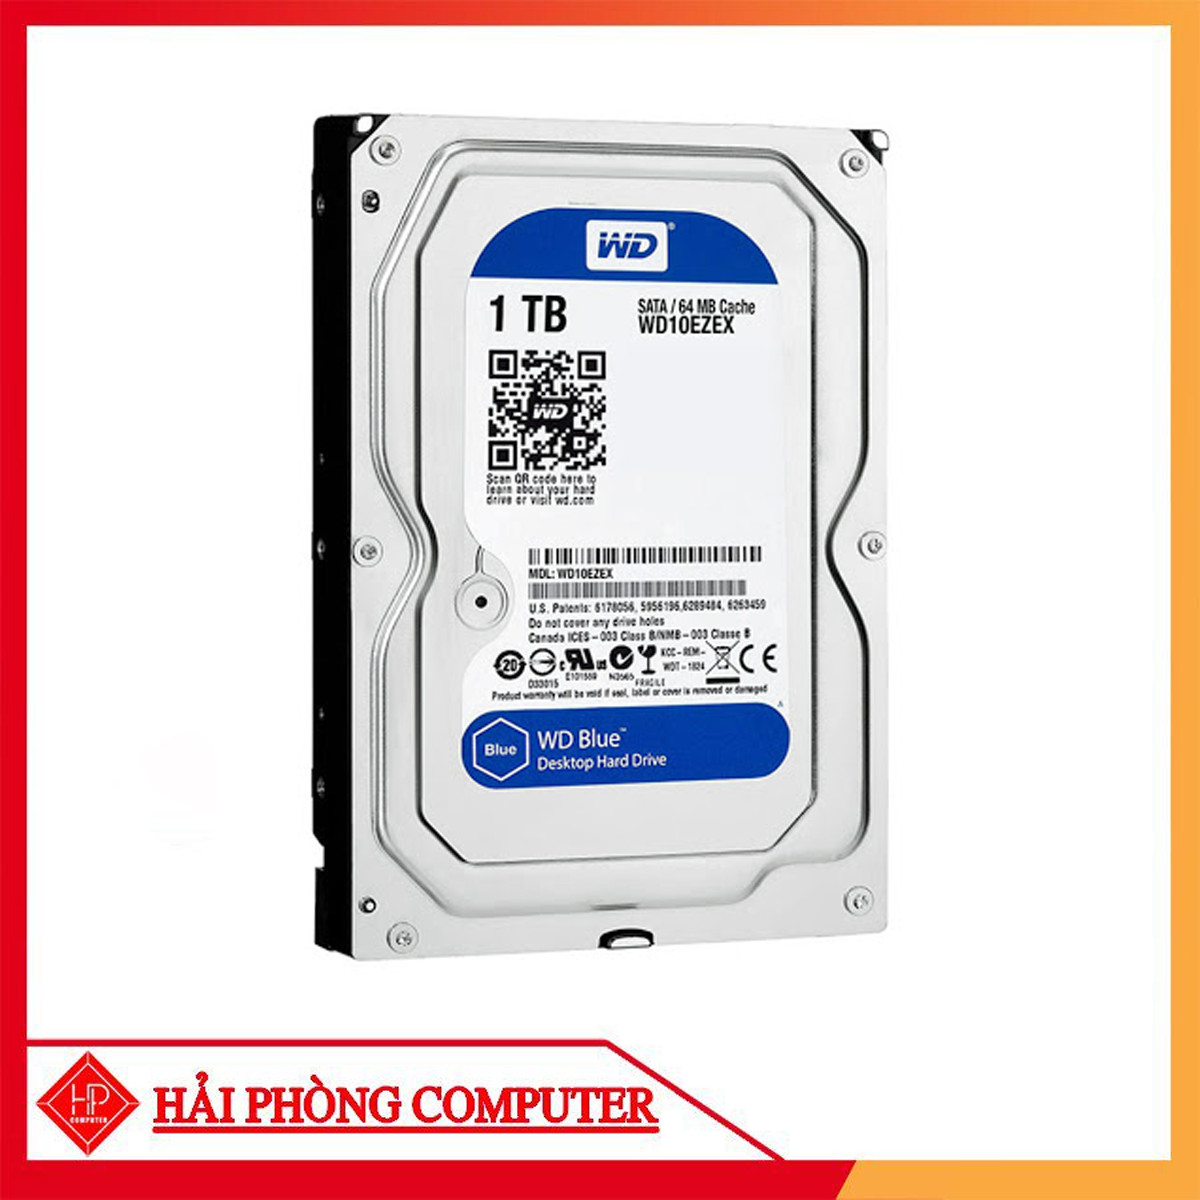 Ổ Cứng HDD WD 1TB BLUE 3.5 INCH, 7200RPM, SATA, 64MB CACHE (WD10EZEX)